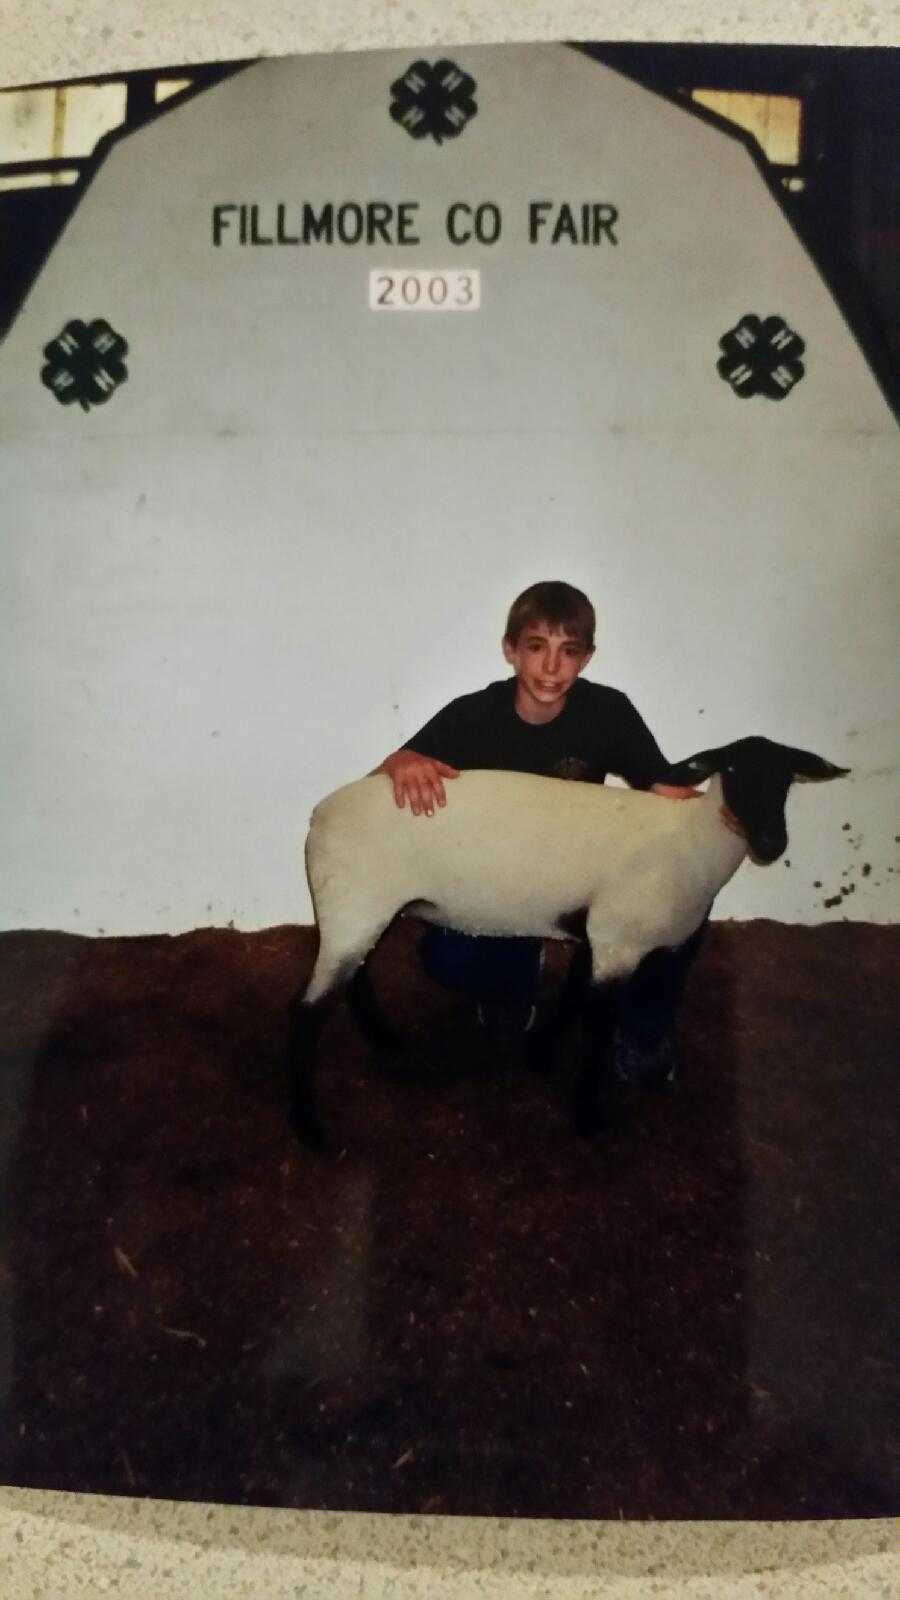 One I of my sheep, I was 13 in this pic 